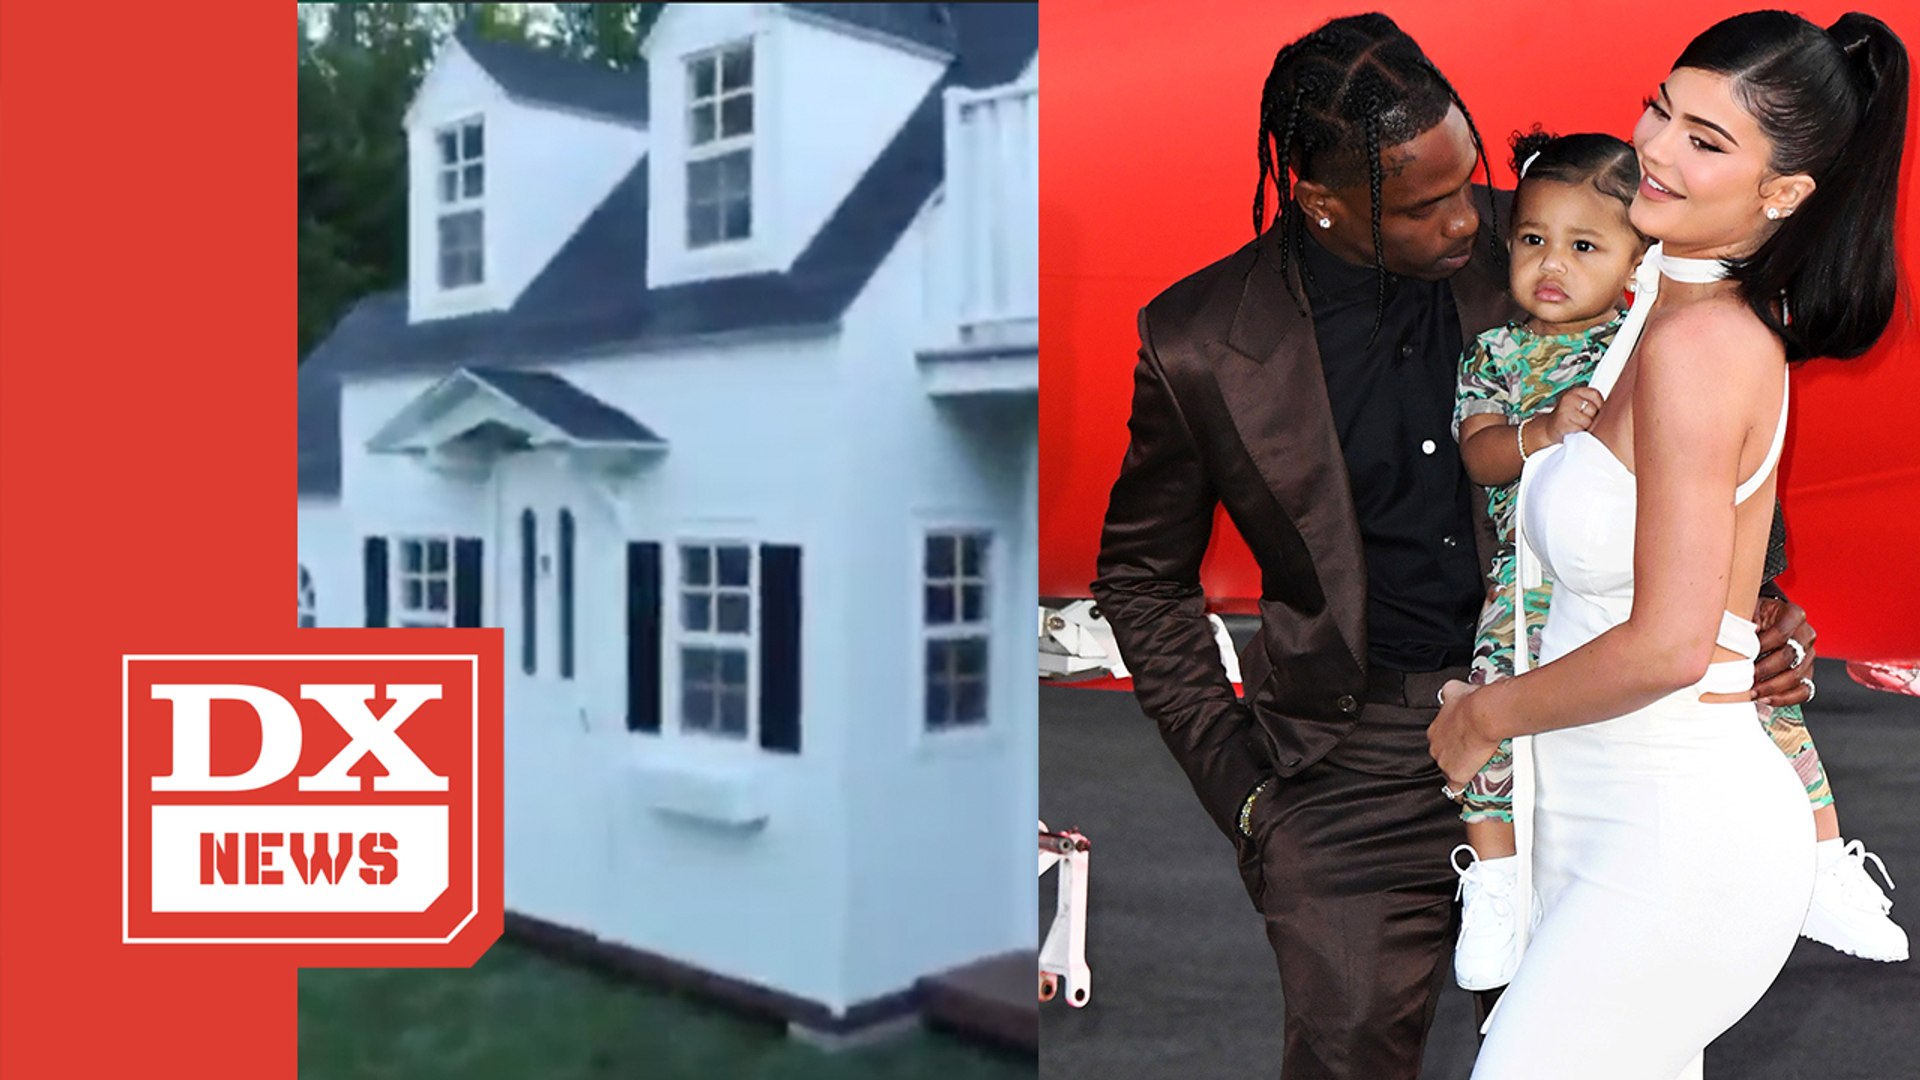 Travis Scott & Kylie Jenner's Daughter Stormi Gets A Life-Sized Playhouse For Christmas